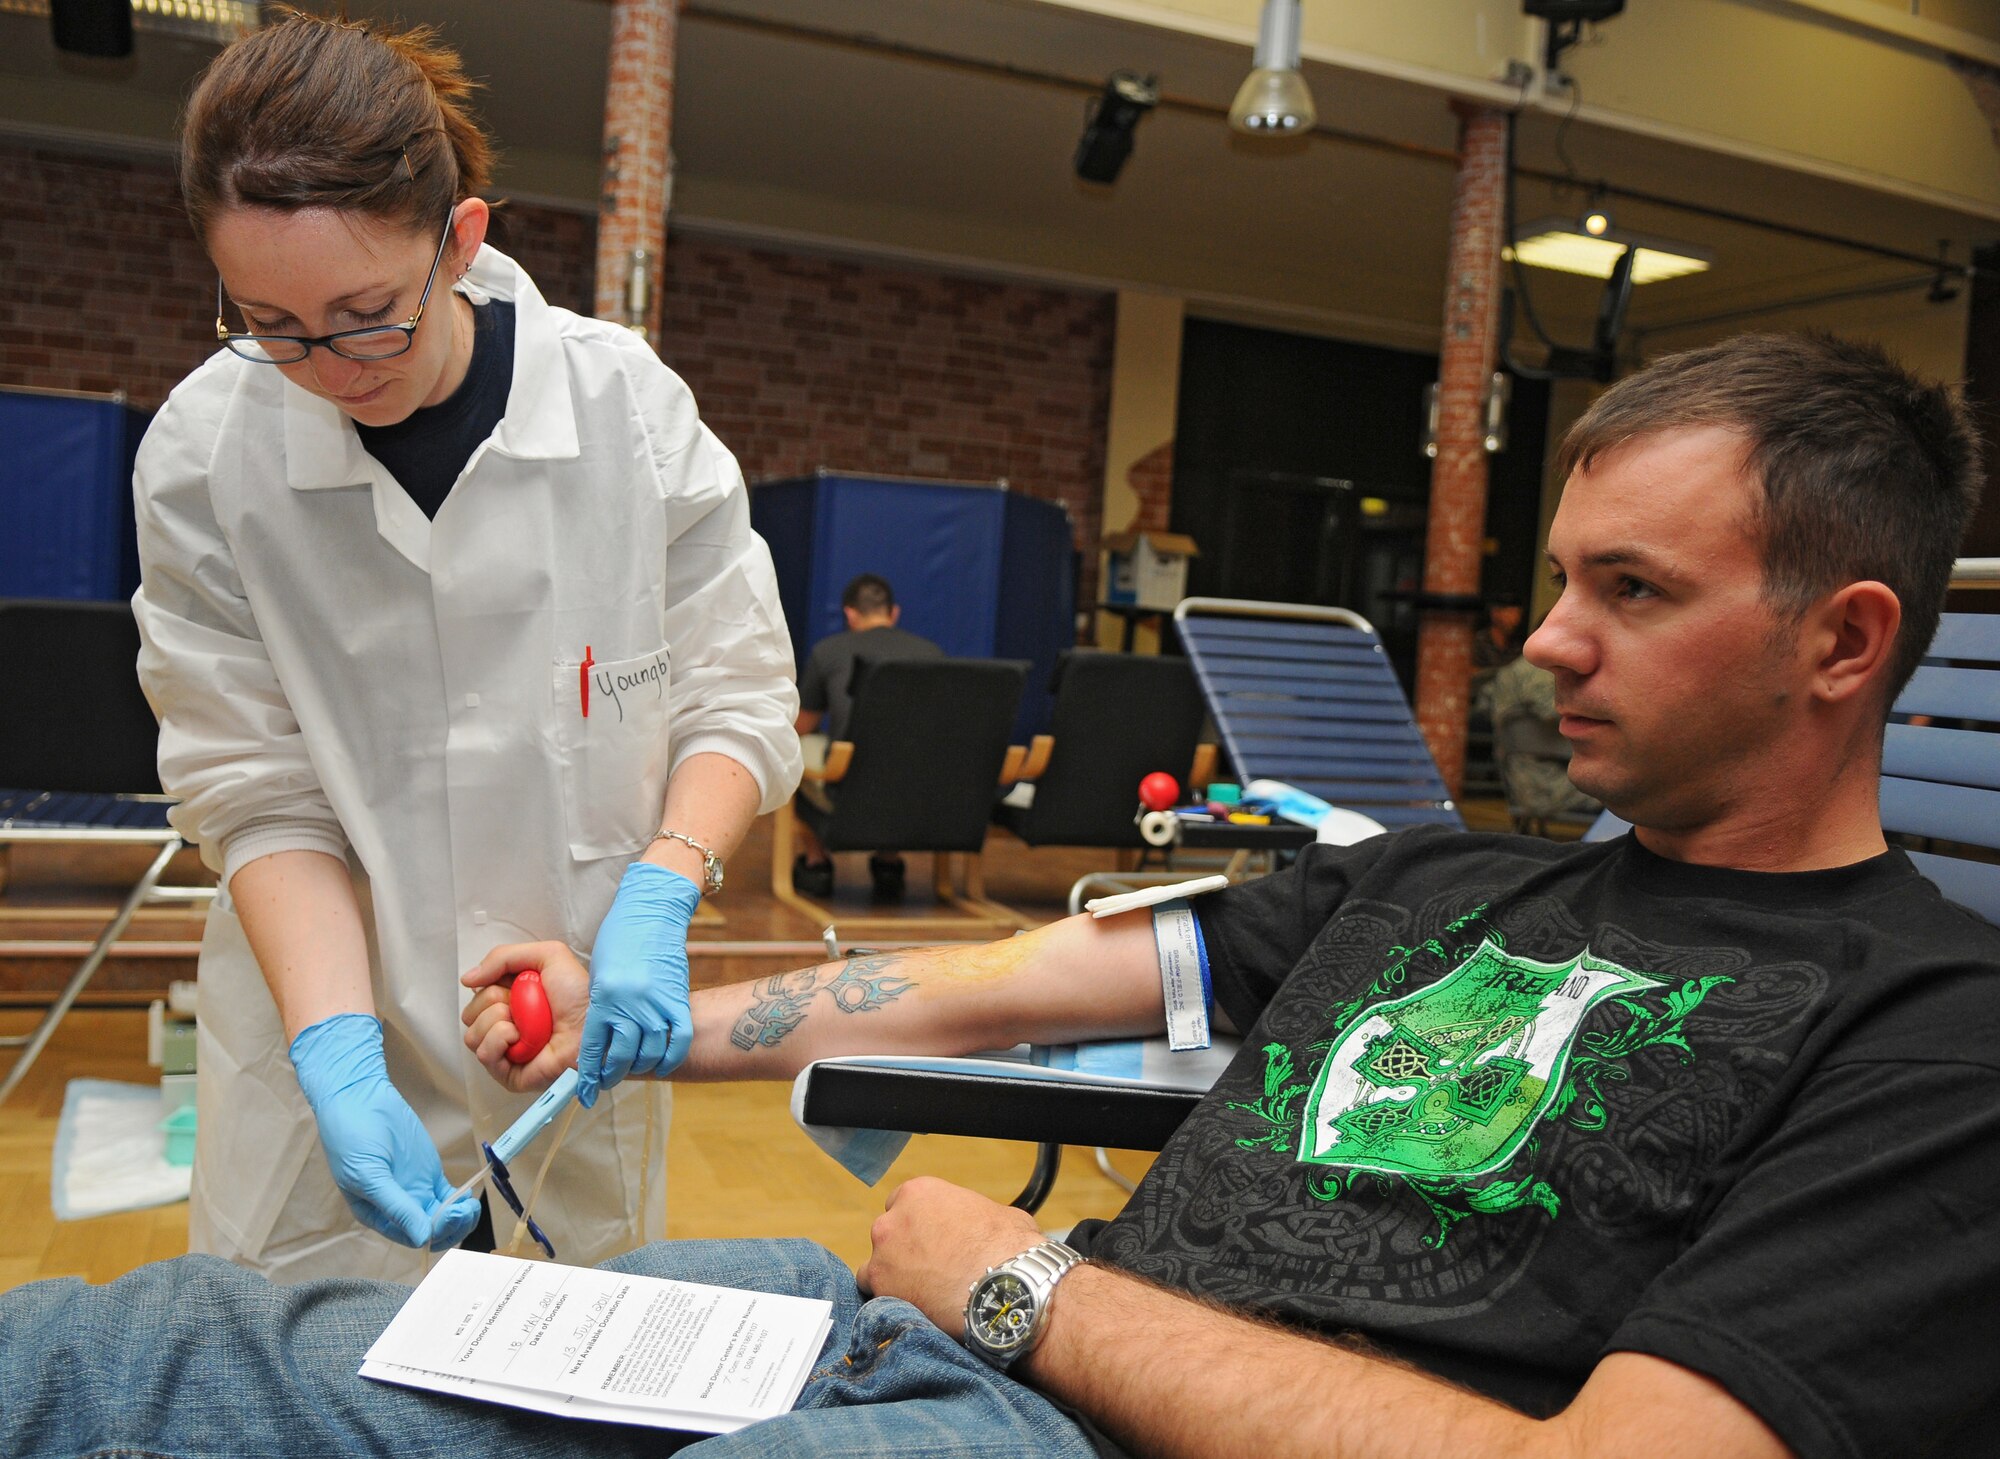 SPANGDAHLEM AIR BASE, Germany – Heather Youngblood, Landstuhl Regional Medical Center phlebotomist, prepares a drawing tube for blood donor Senior Airman Joel Ireland, 726th Air Mobility Squadron, during the Spangdahlem Blood Drive here May 18. The Armed Forces Blood Drive is a worldwide joint operation organized by the Armed Services Blood Program to collect, process, store, distribute, and transfuse blood to many different locations across the globe. (U.S. Air Force photo/Airman 1st Class Dillon Davis)